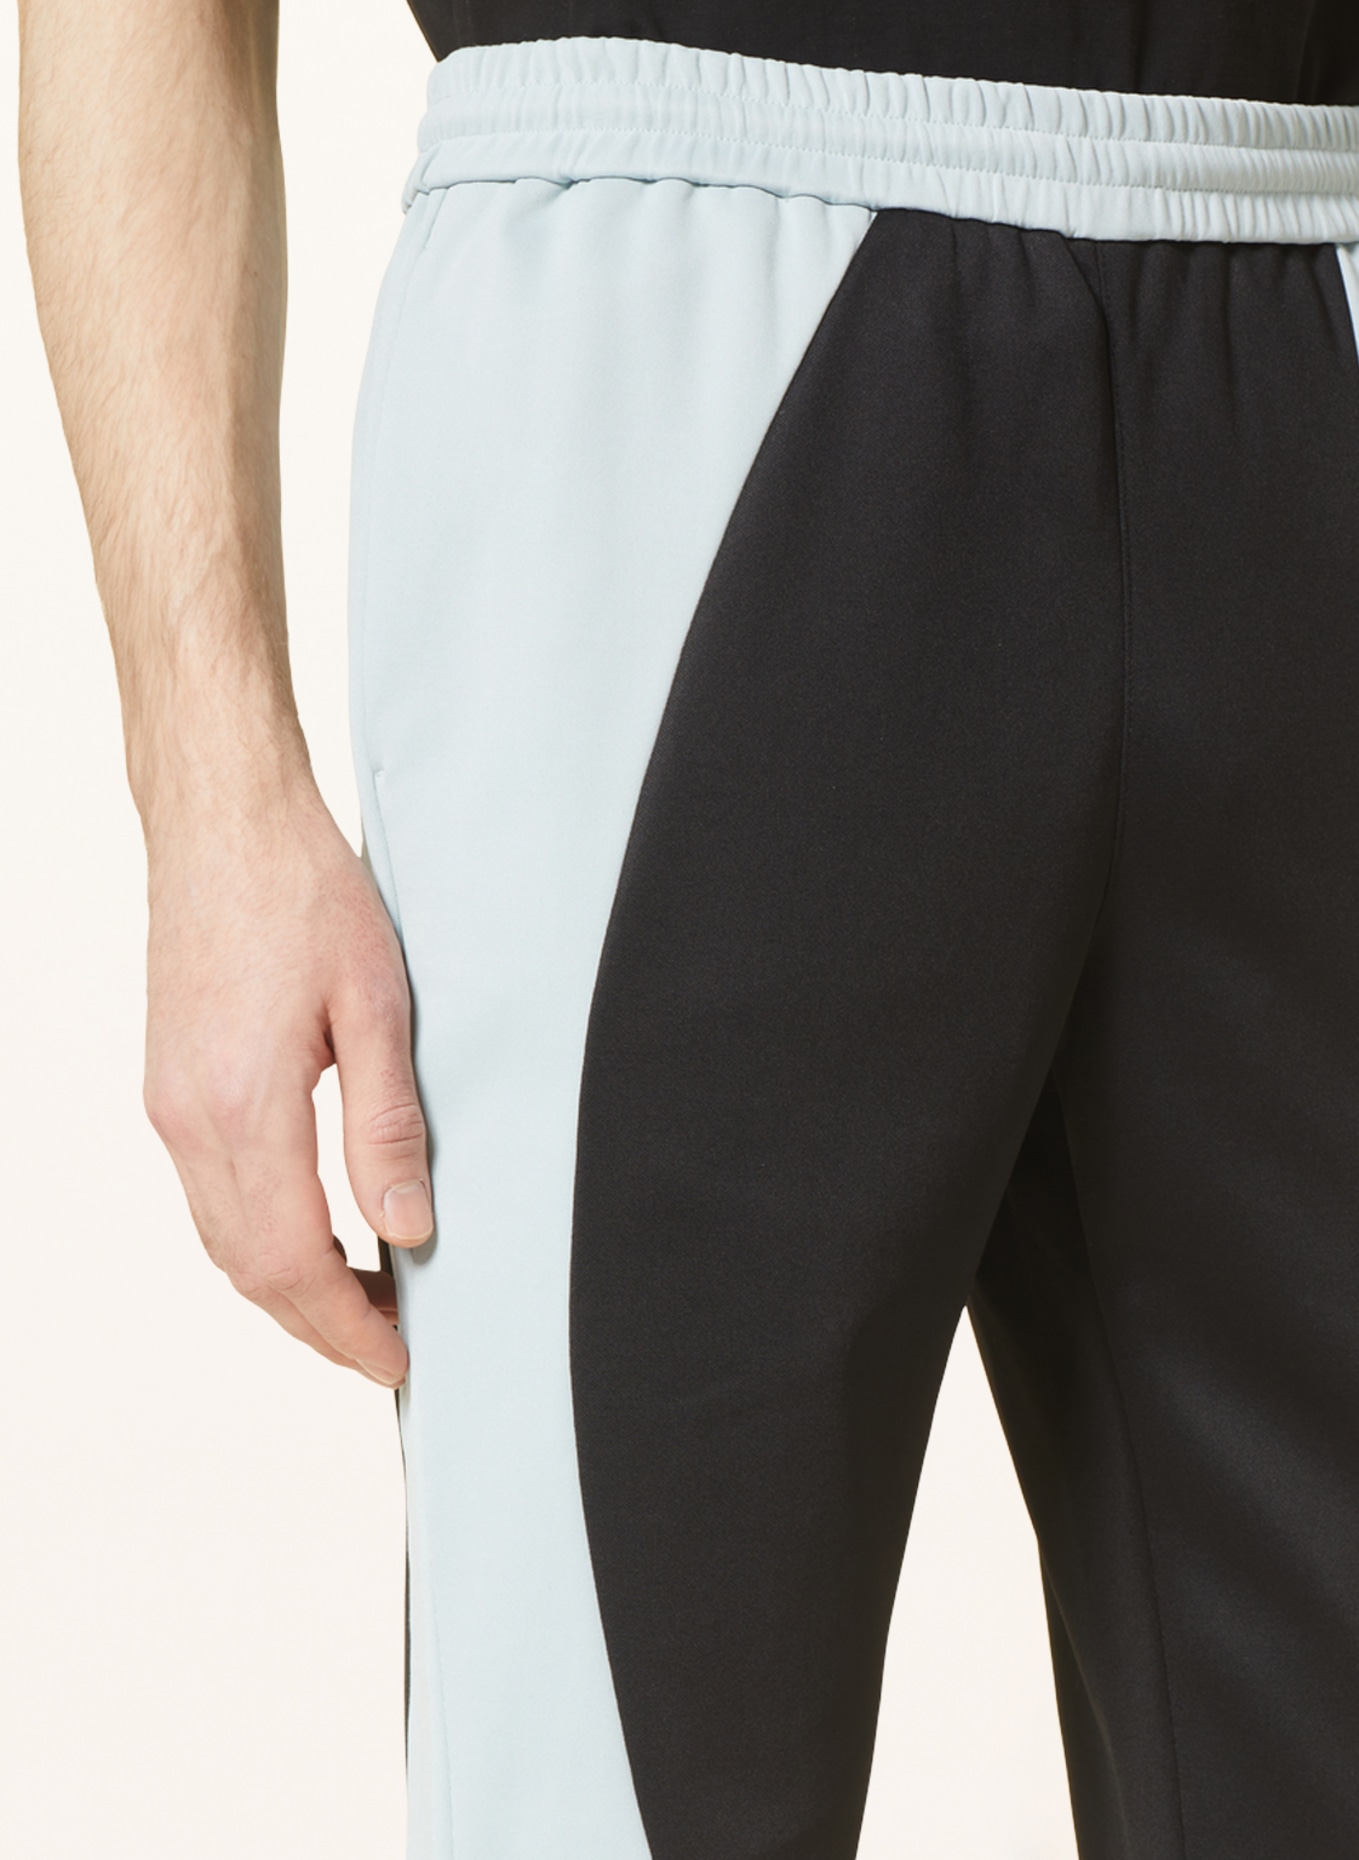 Off-White Pants in jogger style, Color: BLACK/ LIGHT GRAY (Image 5)